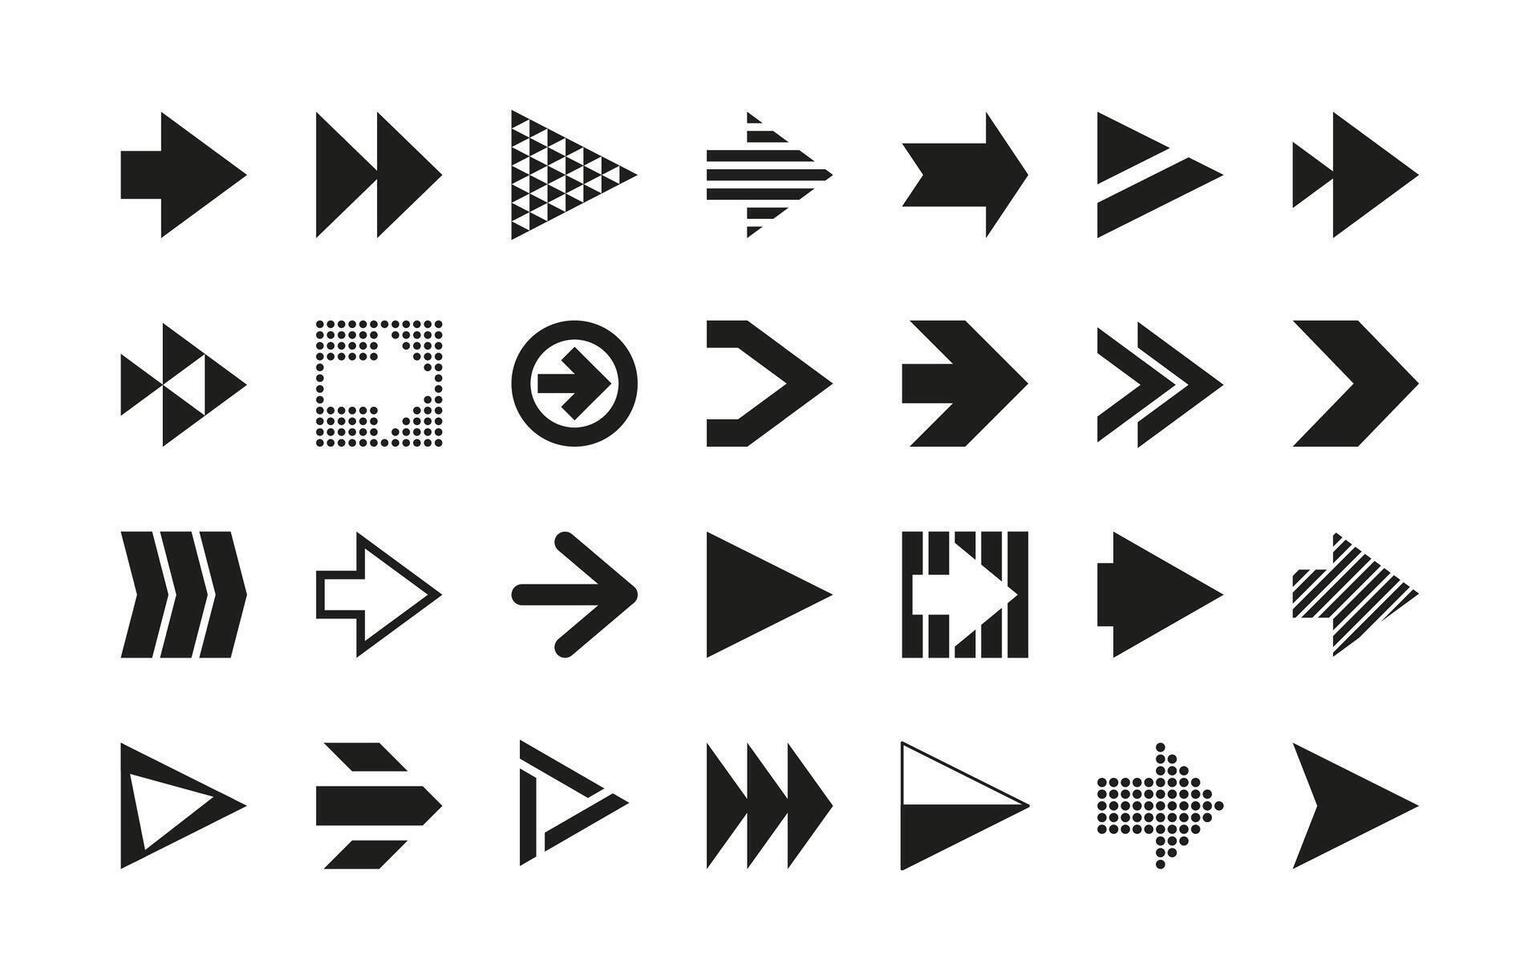 Black arrows. Simple navigation orientation pictograms, directional pointers and cursor click download buttons abstract flat style. Vector isolated set